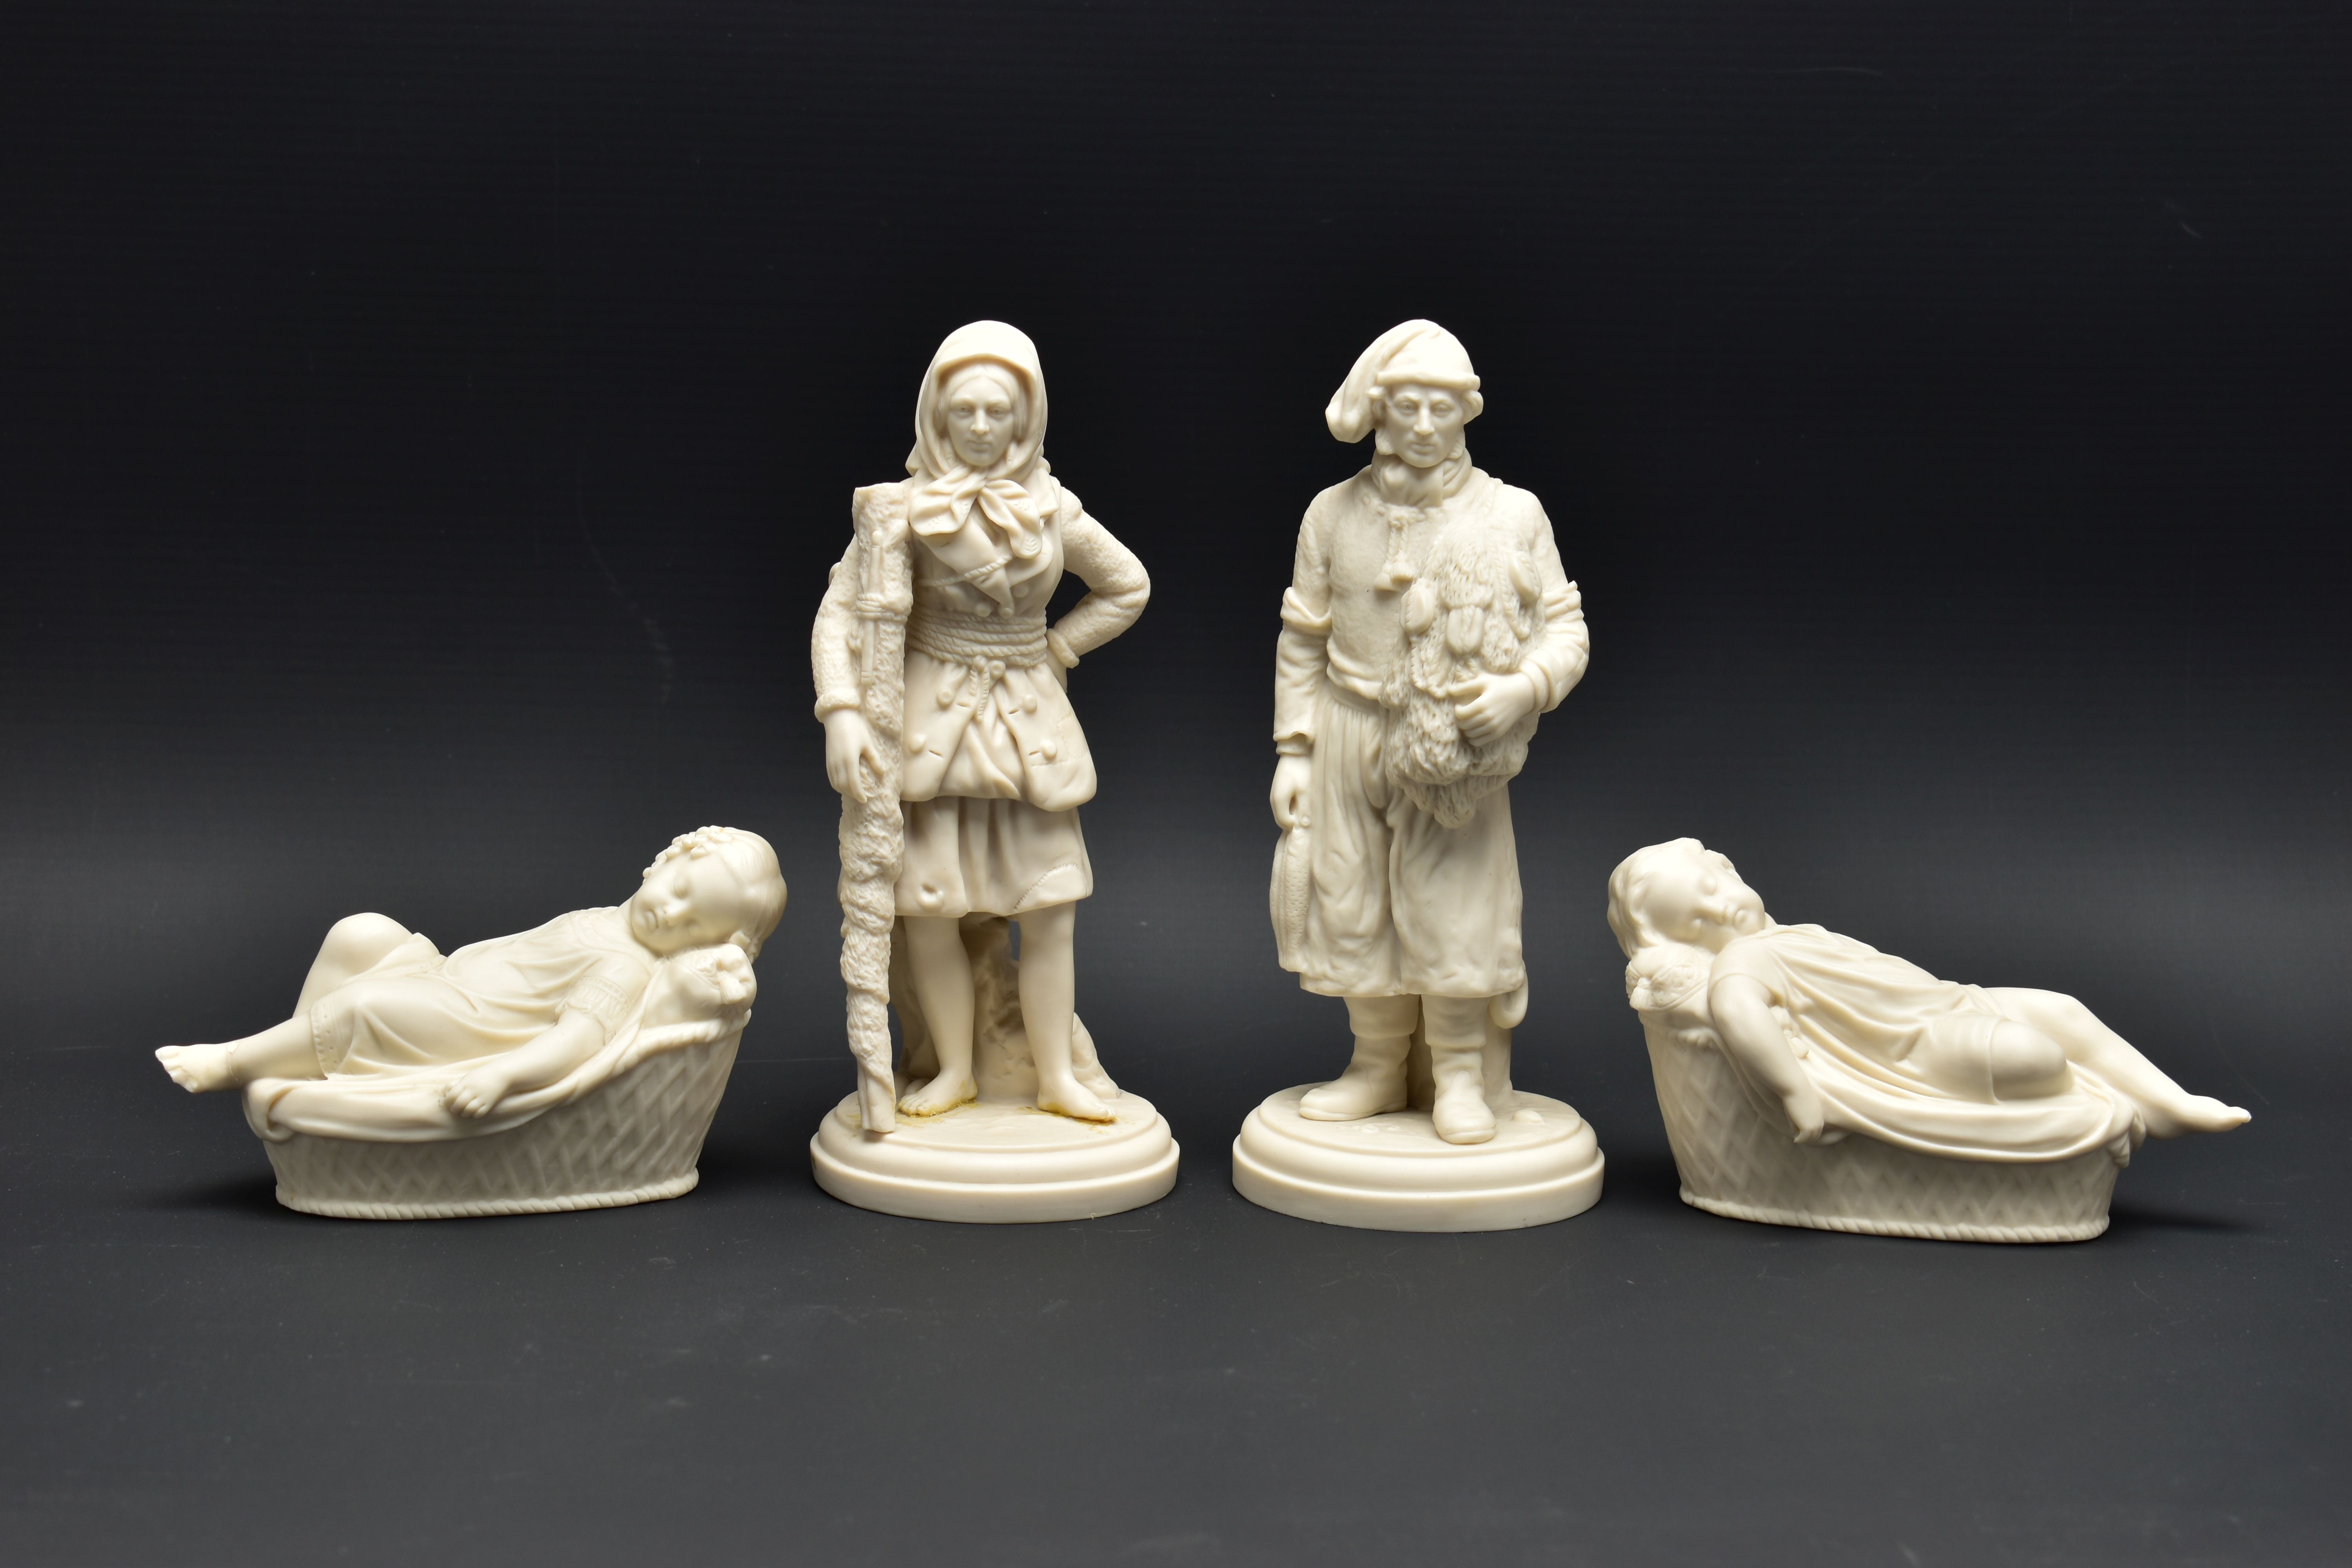 A PAIR OF 19TH CENTURY COPELAND PARIAN FIGURES OF A BOULOGNE FISHERMAN AND HIS COMPANION, modelled